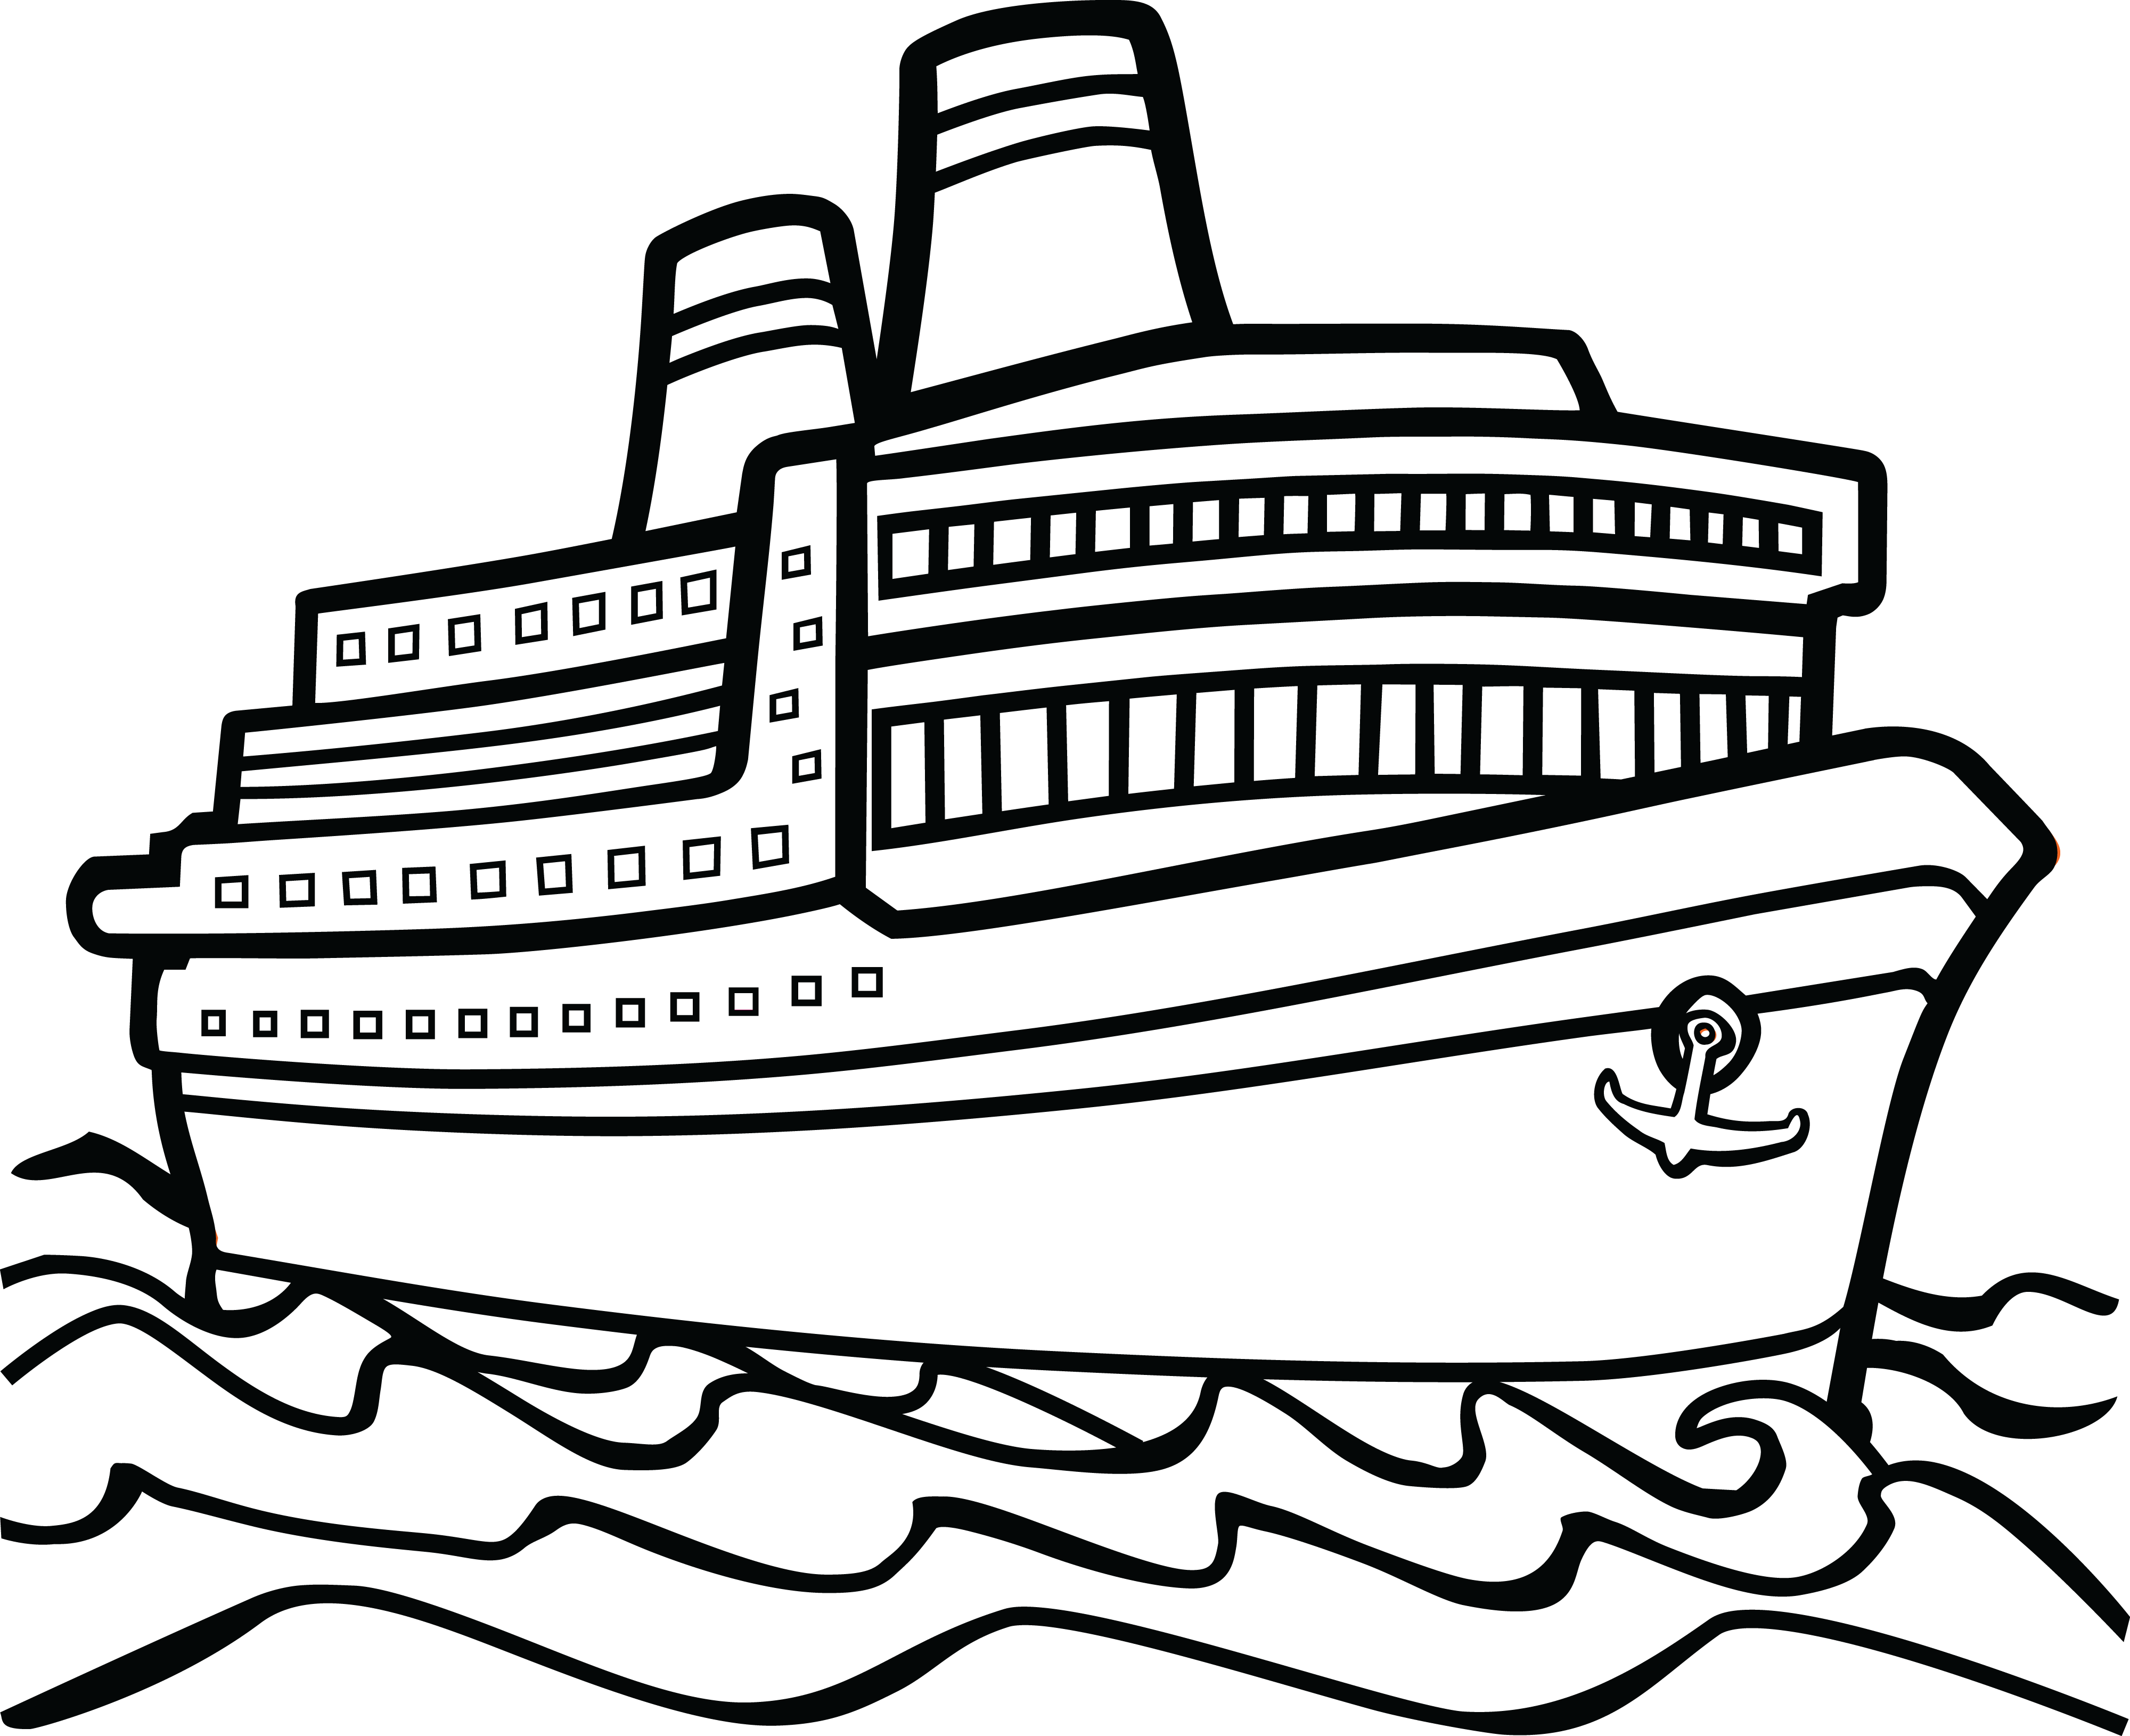 Top free of cruise. Boat clipart black and white